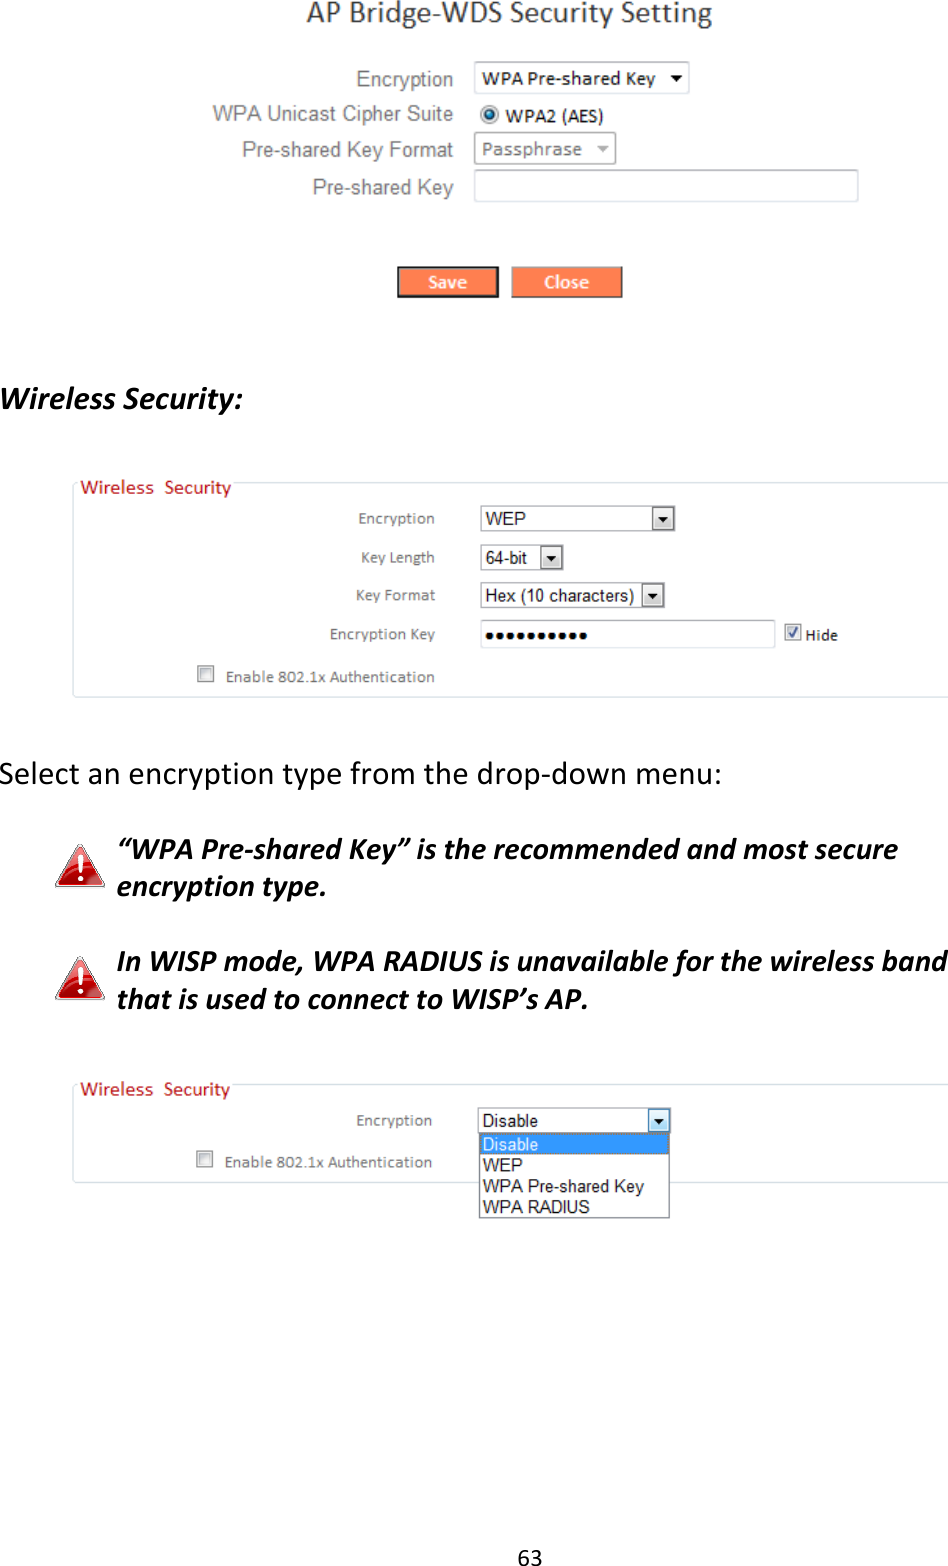 63   Wireless Security:    Select an encryption type from the drop-down menu:  “WPA Pre-shared Key” is the recommended and most secure encryption type.  In WISP mode, WPA RADIUS is unavailable for the wireless band that is used to connect to WISP’s AP.     